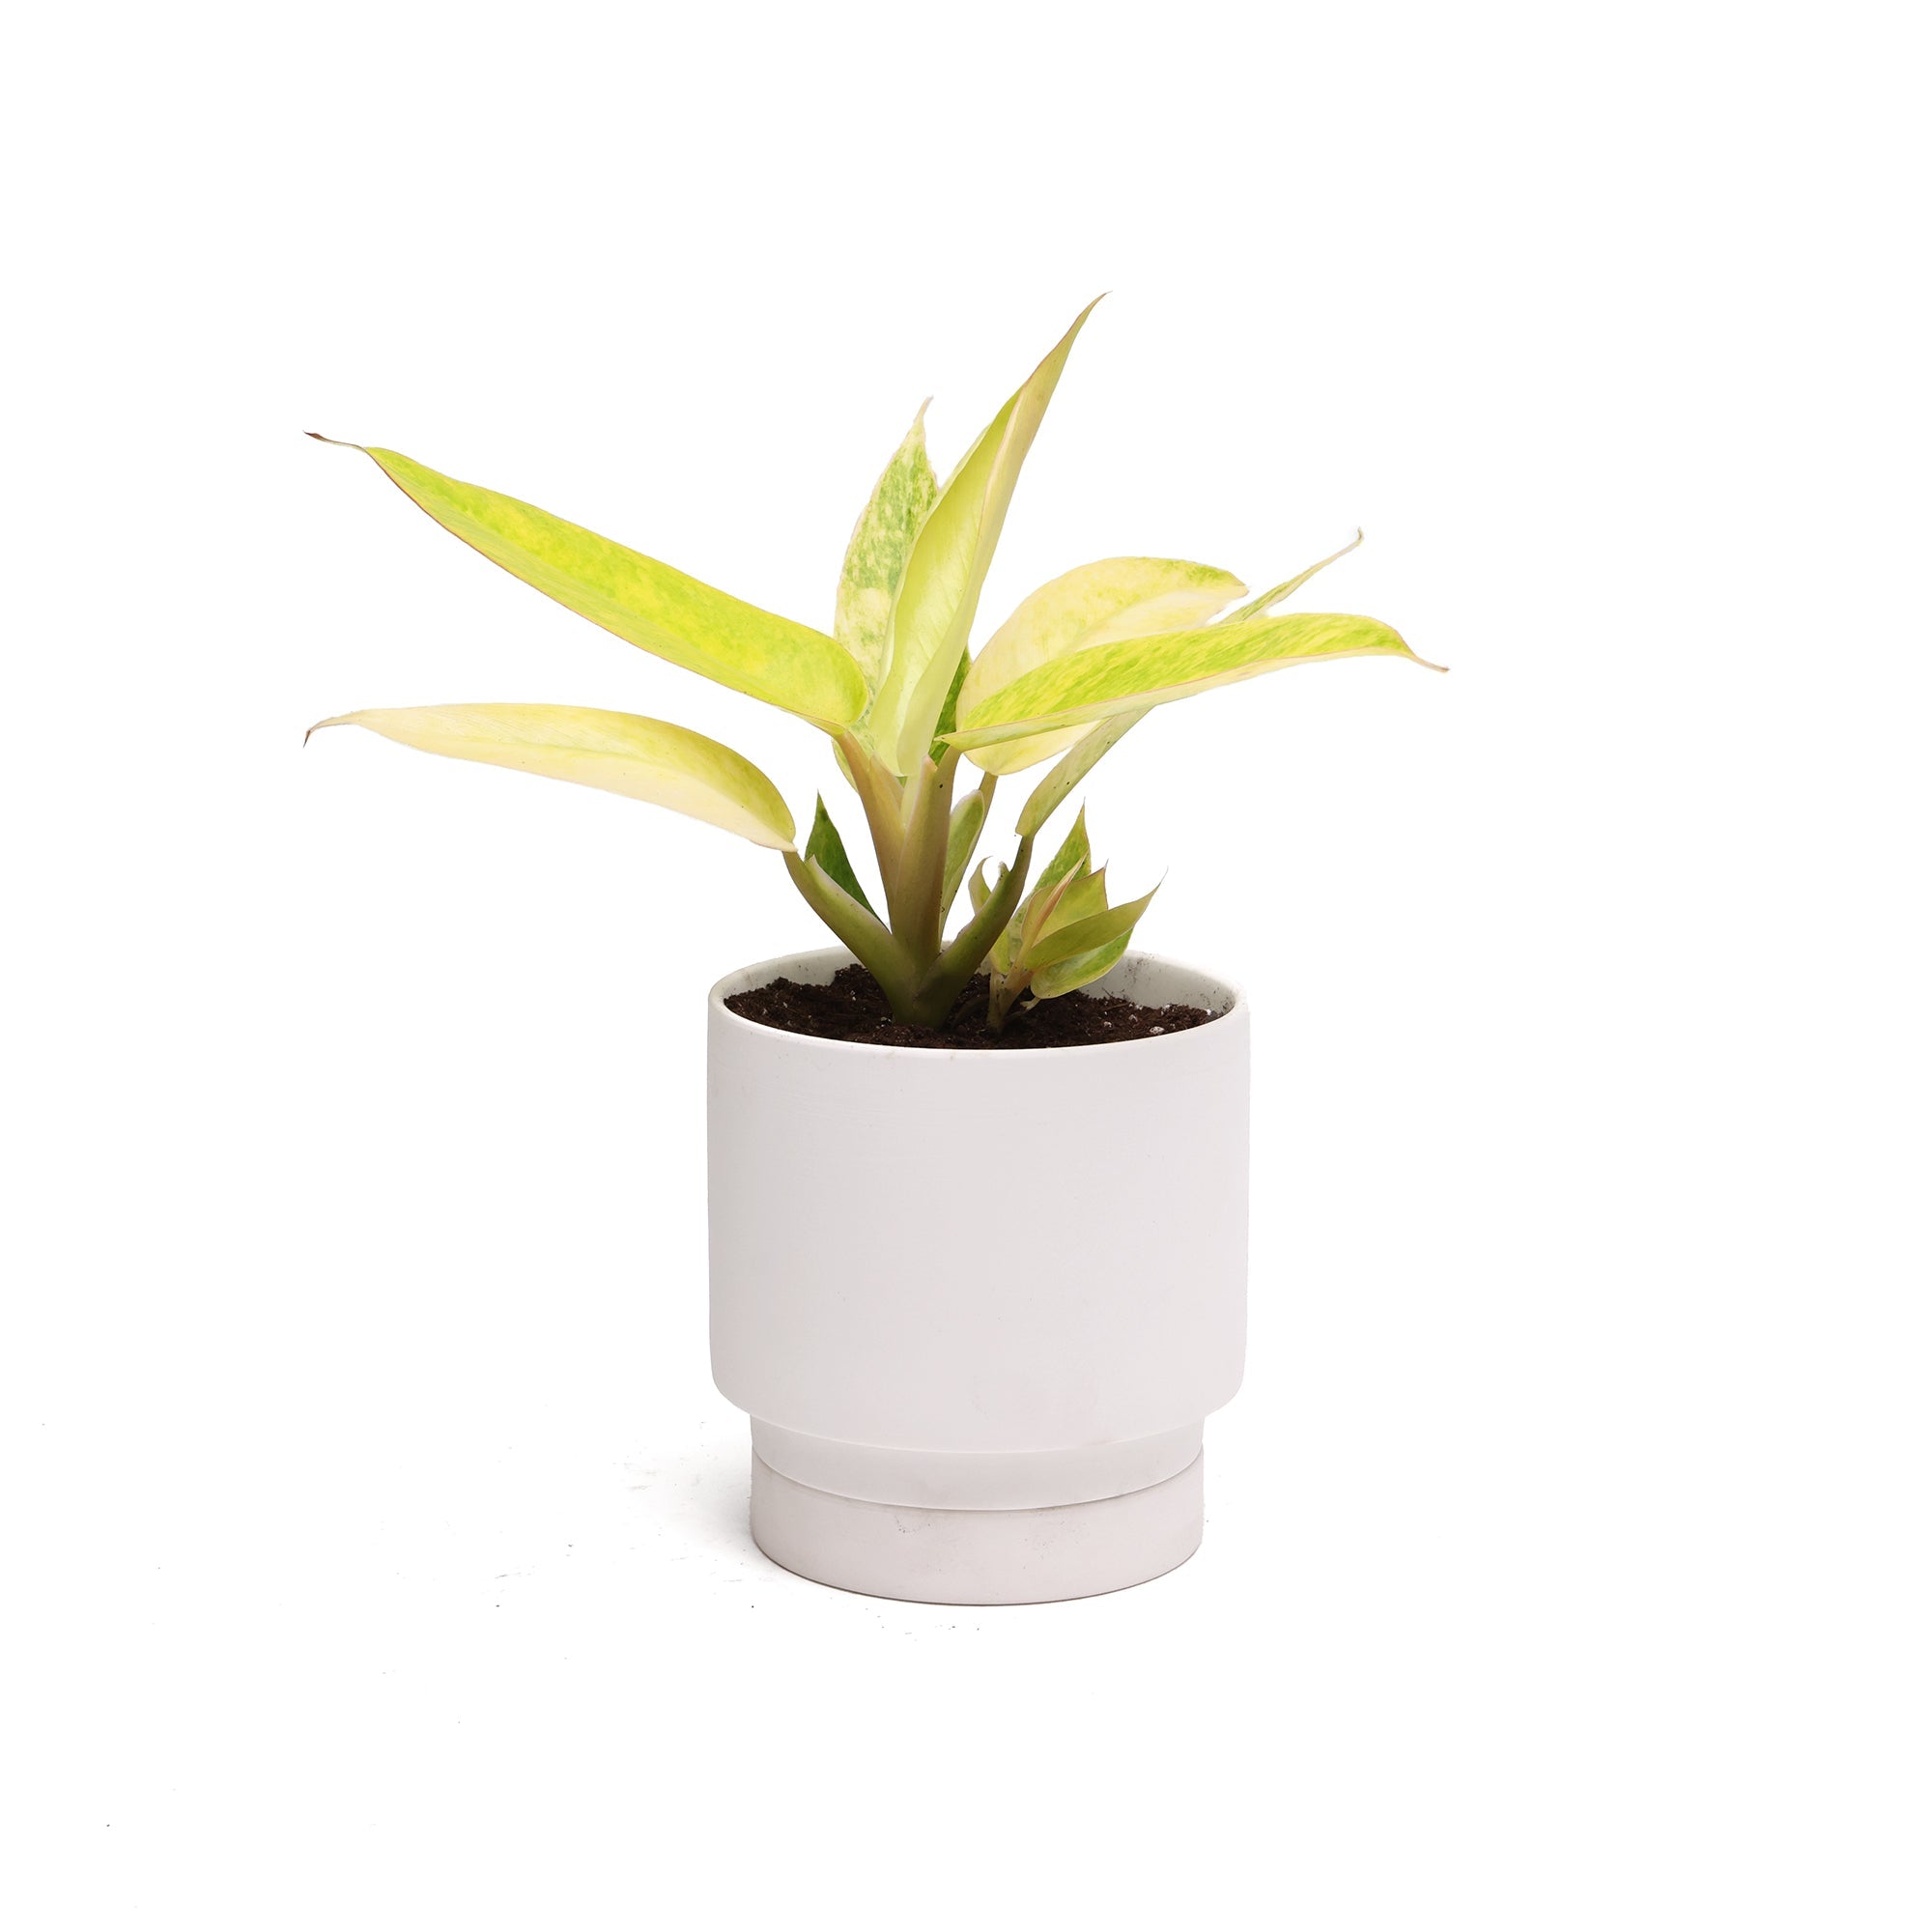 A small Potted Philodendron Calkin Gold 6” plant in a Casey pot against a white background. The pot is cylindrical and slightly elevated at the base.